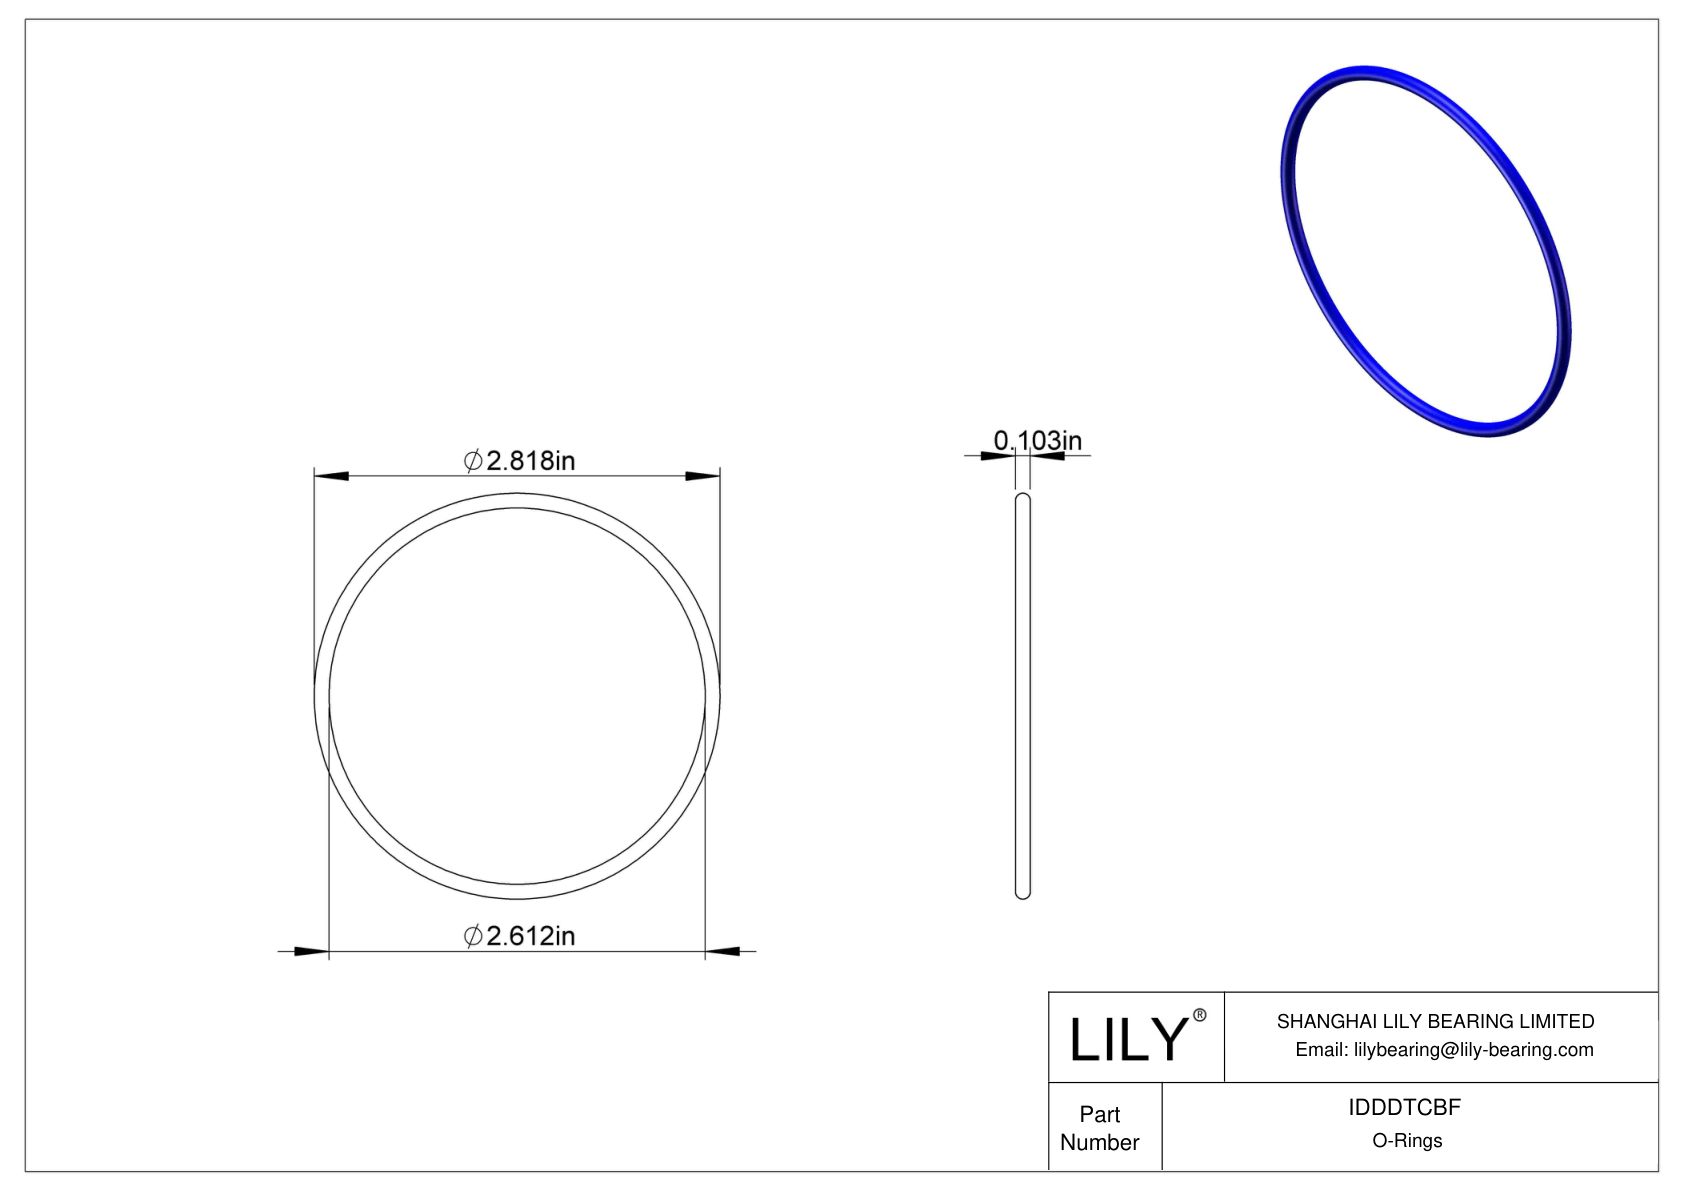 IDDDTCBF Chemical Resistant O-rings Round cad drawing